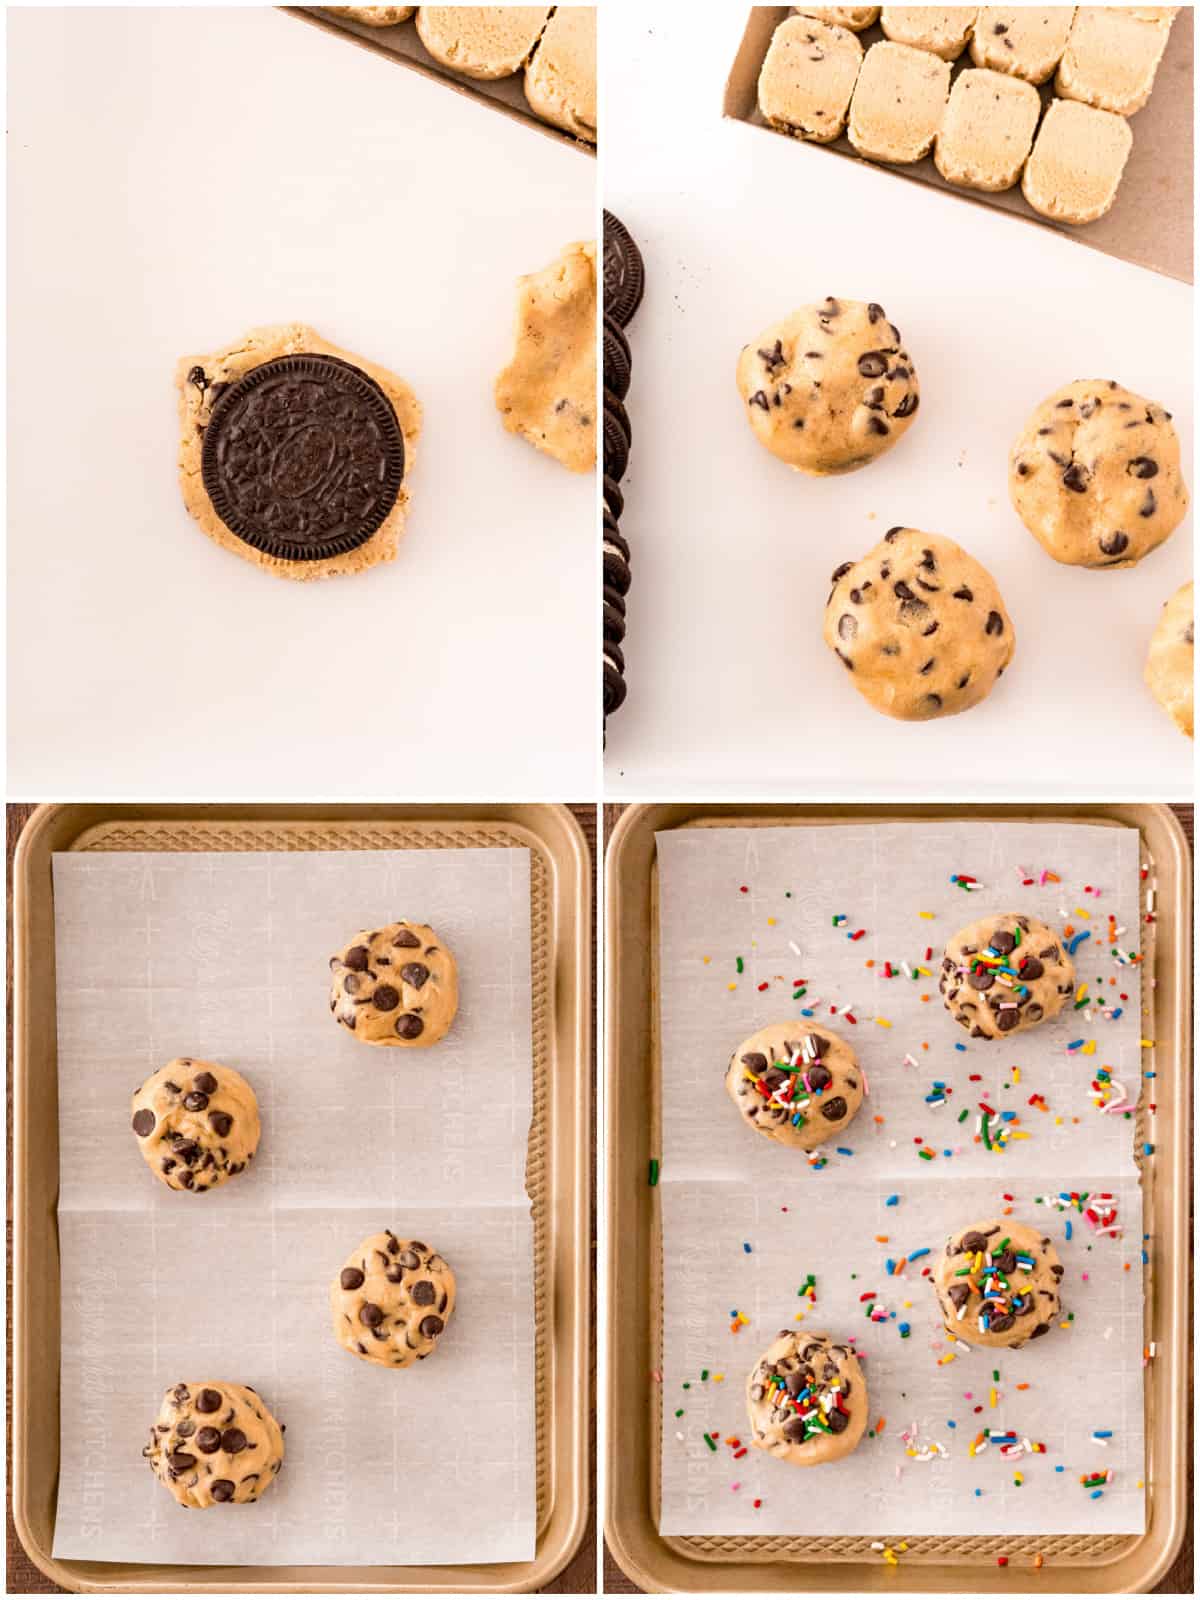 Step by step photos on how to make Oreo Stuffed Chocolate Chip Cookies.